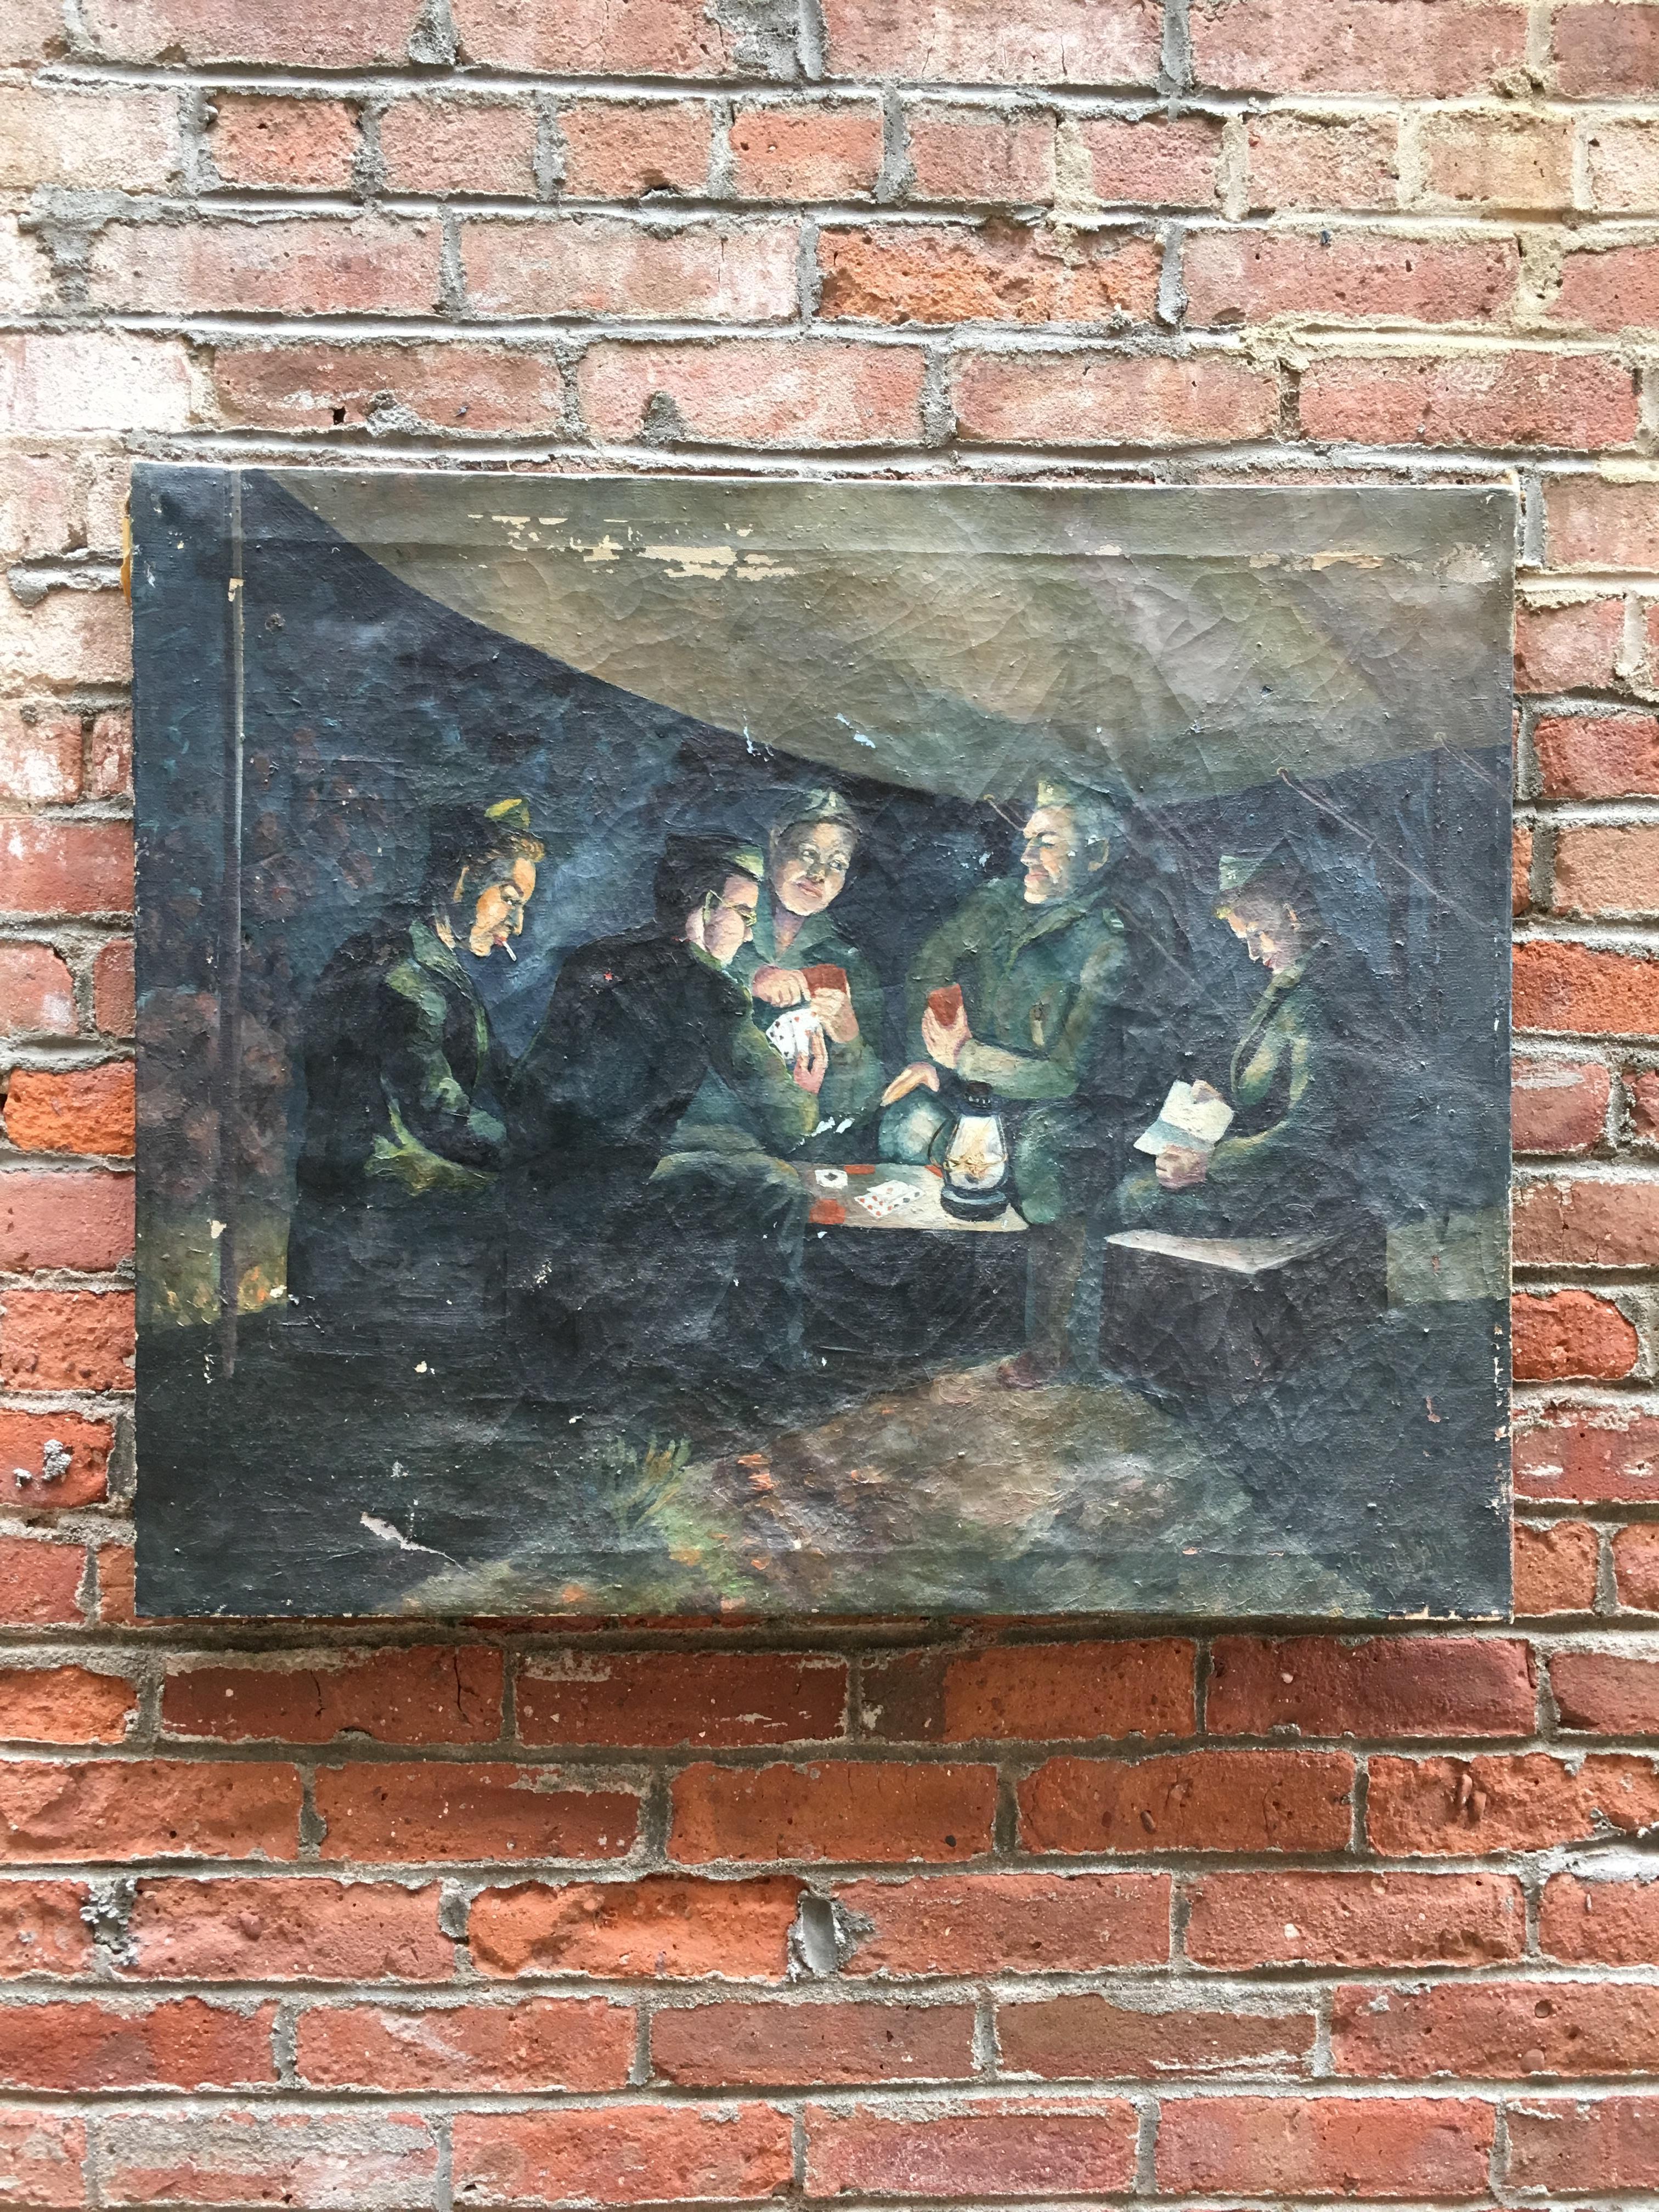 A fascinating peep hole view of a soldiers down time at the start of the second World War. A single lantern illuminates the resting and content faces of new draftees reading and playing cards. The oil painting on canvas is signed and dated lower